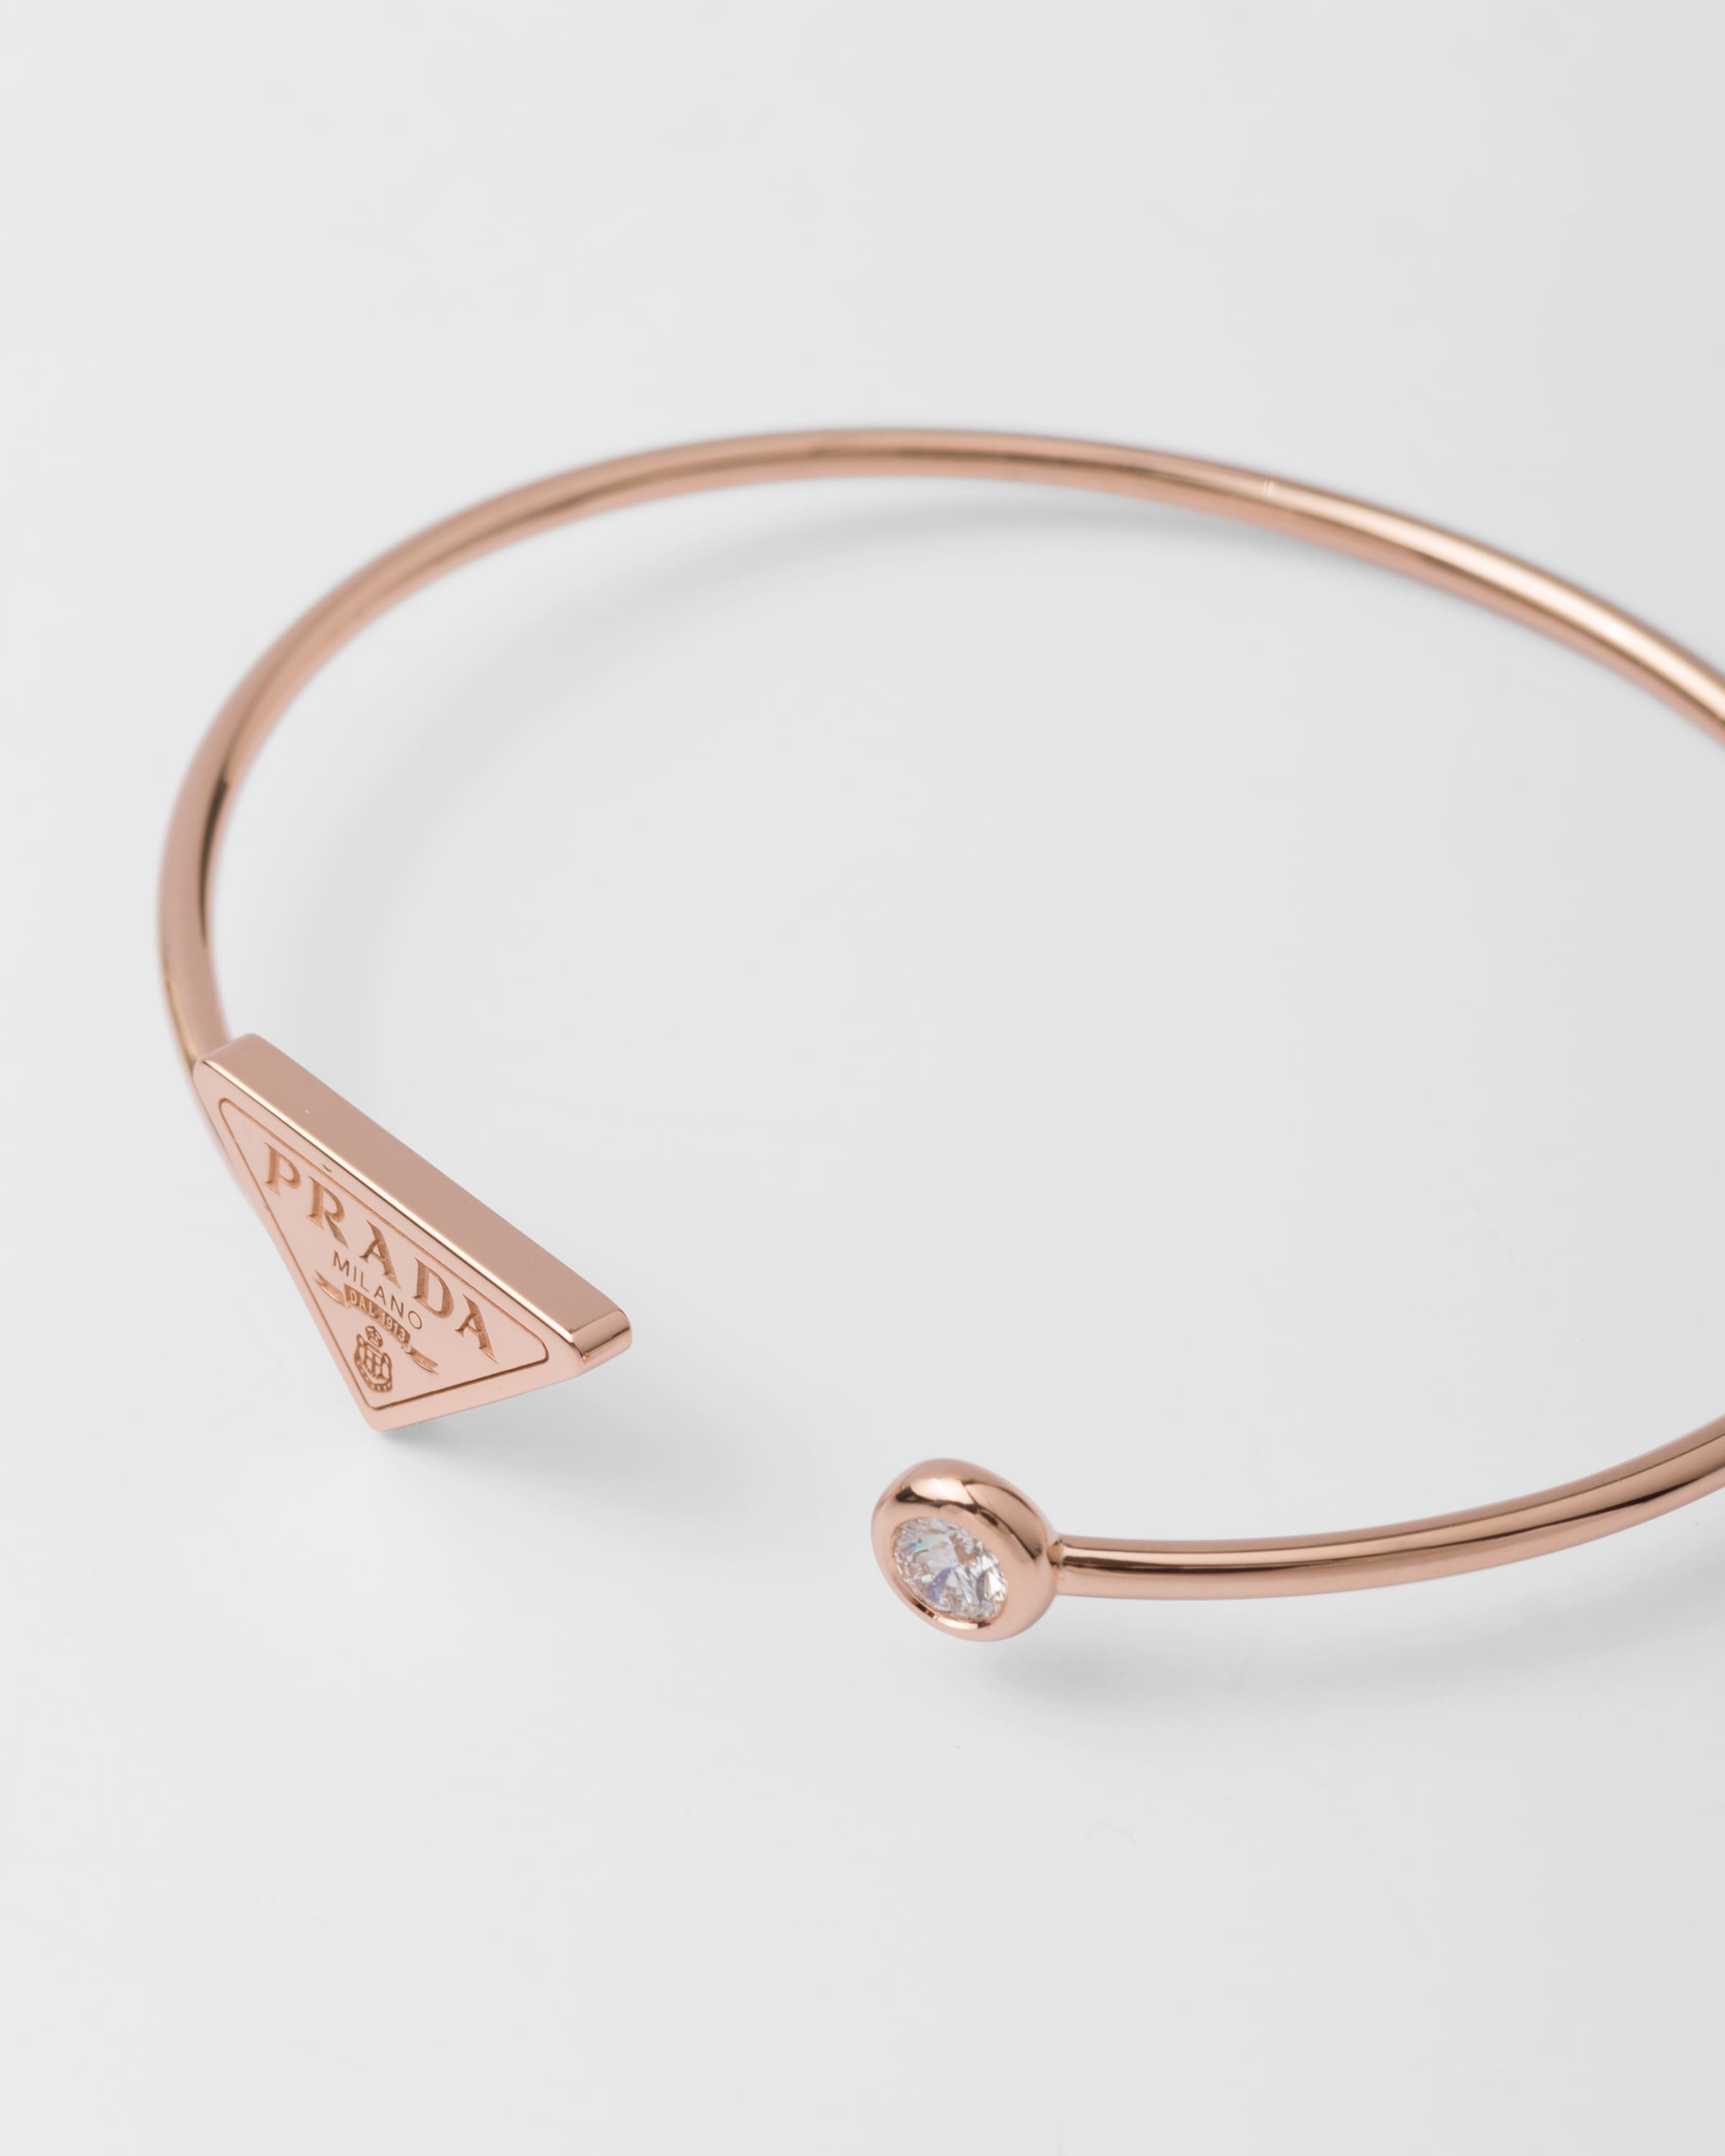 Eternal Gold bangle bracelet in pink gold with diamond - 3